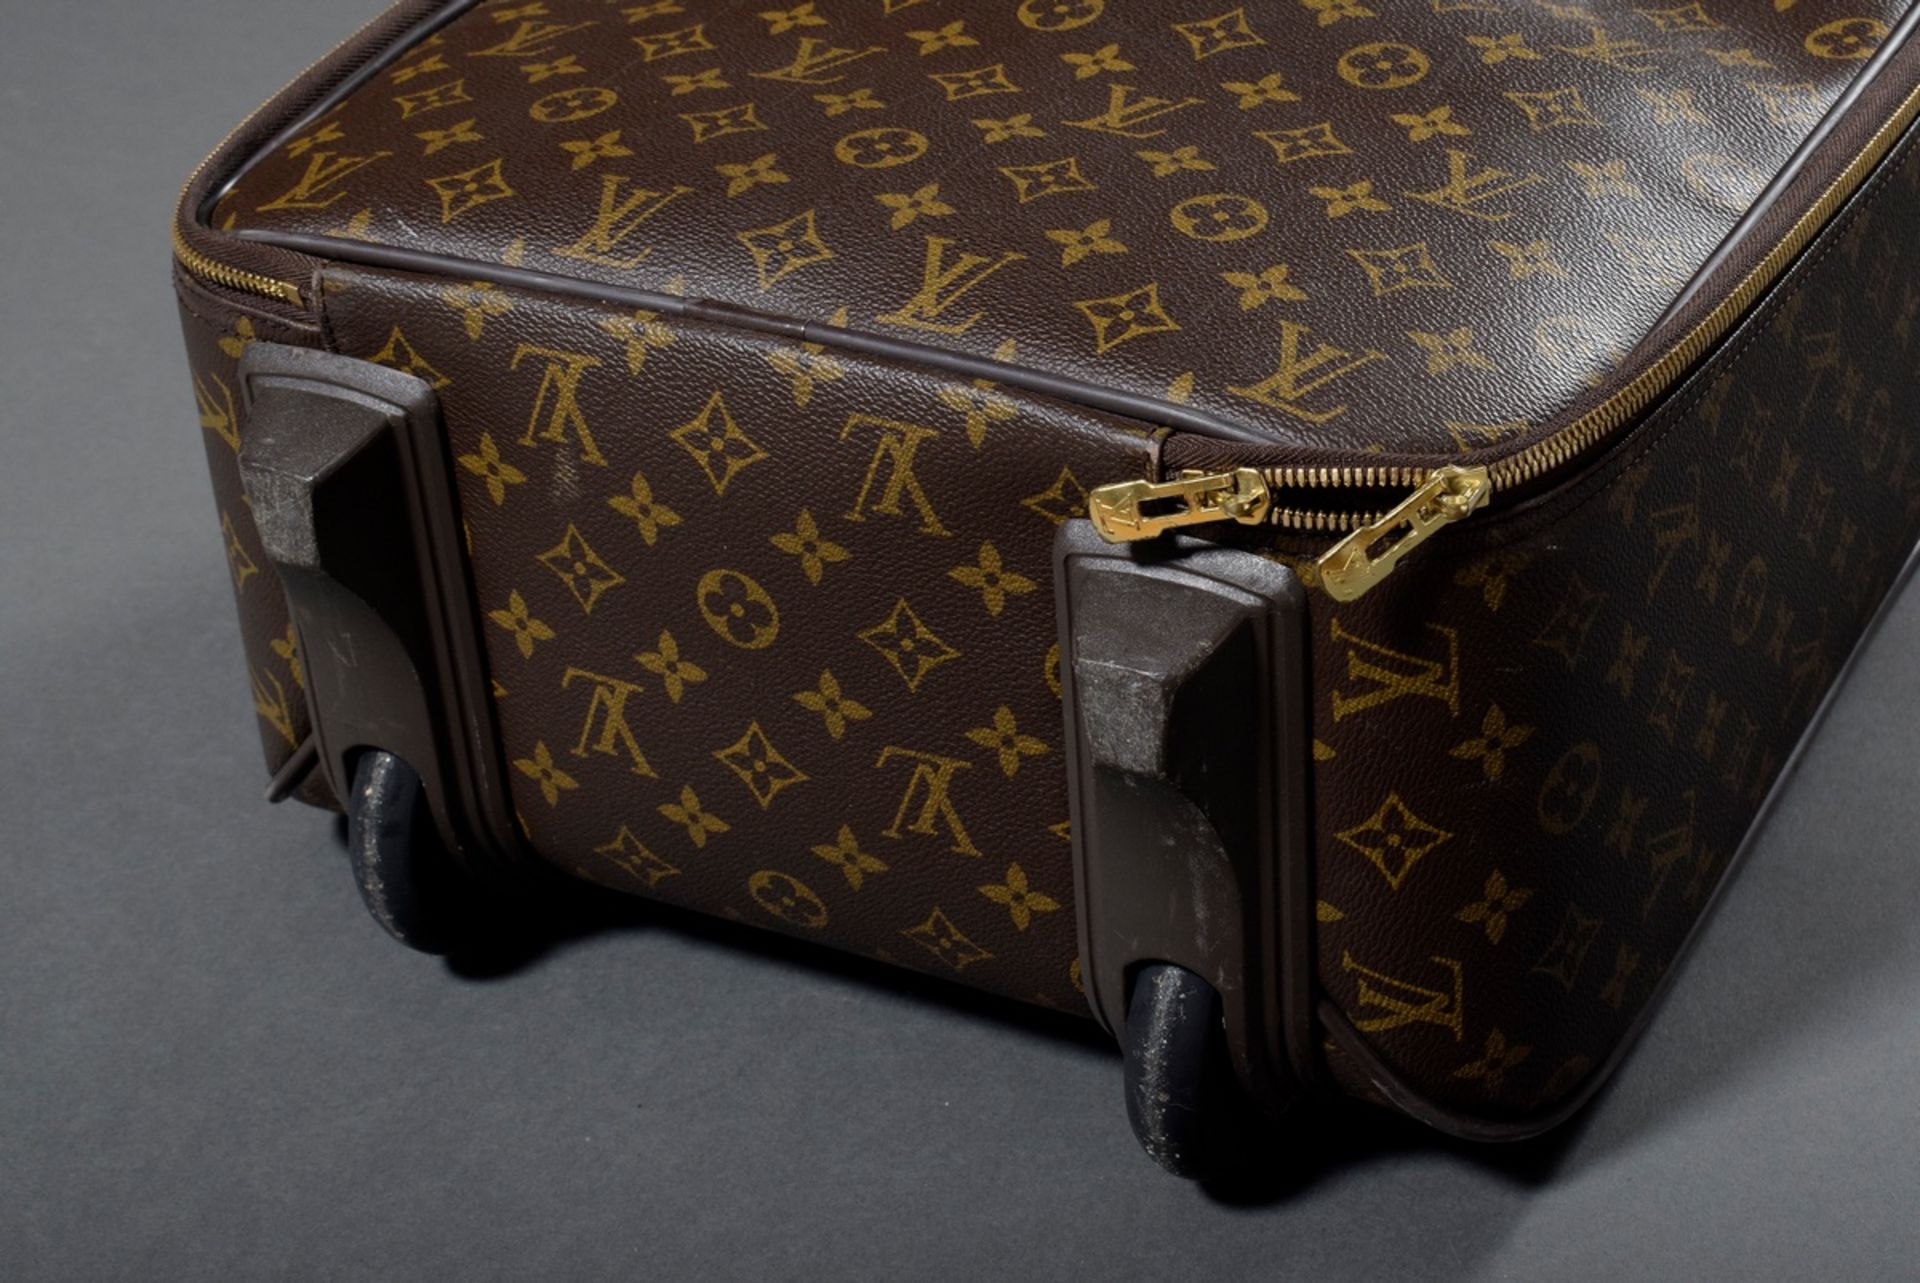 Louis Vuitton "Pégase 50" in "Monogram Canvas" with light cowhide details, gold-coloured hardware,  - Image 4 of 6